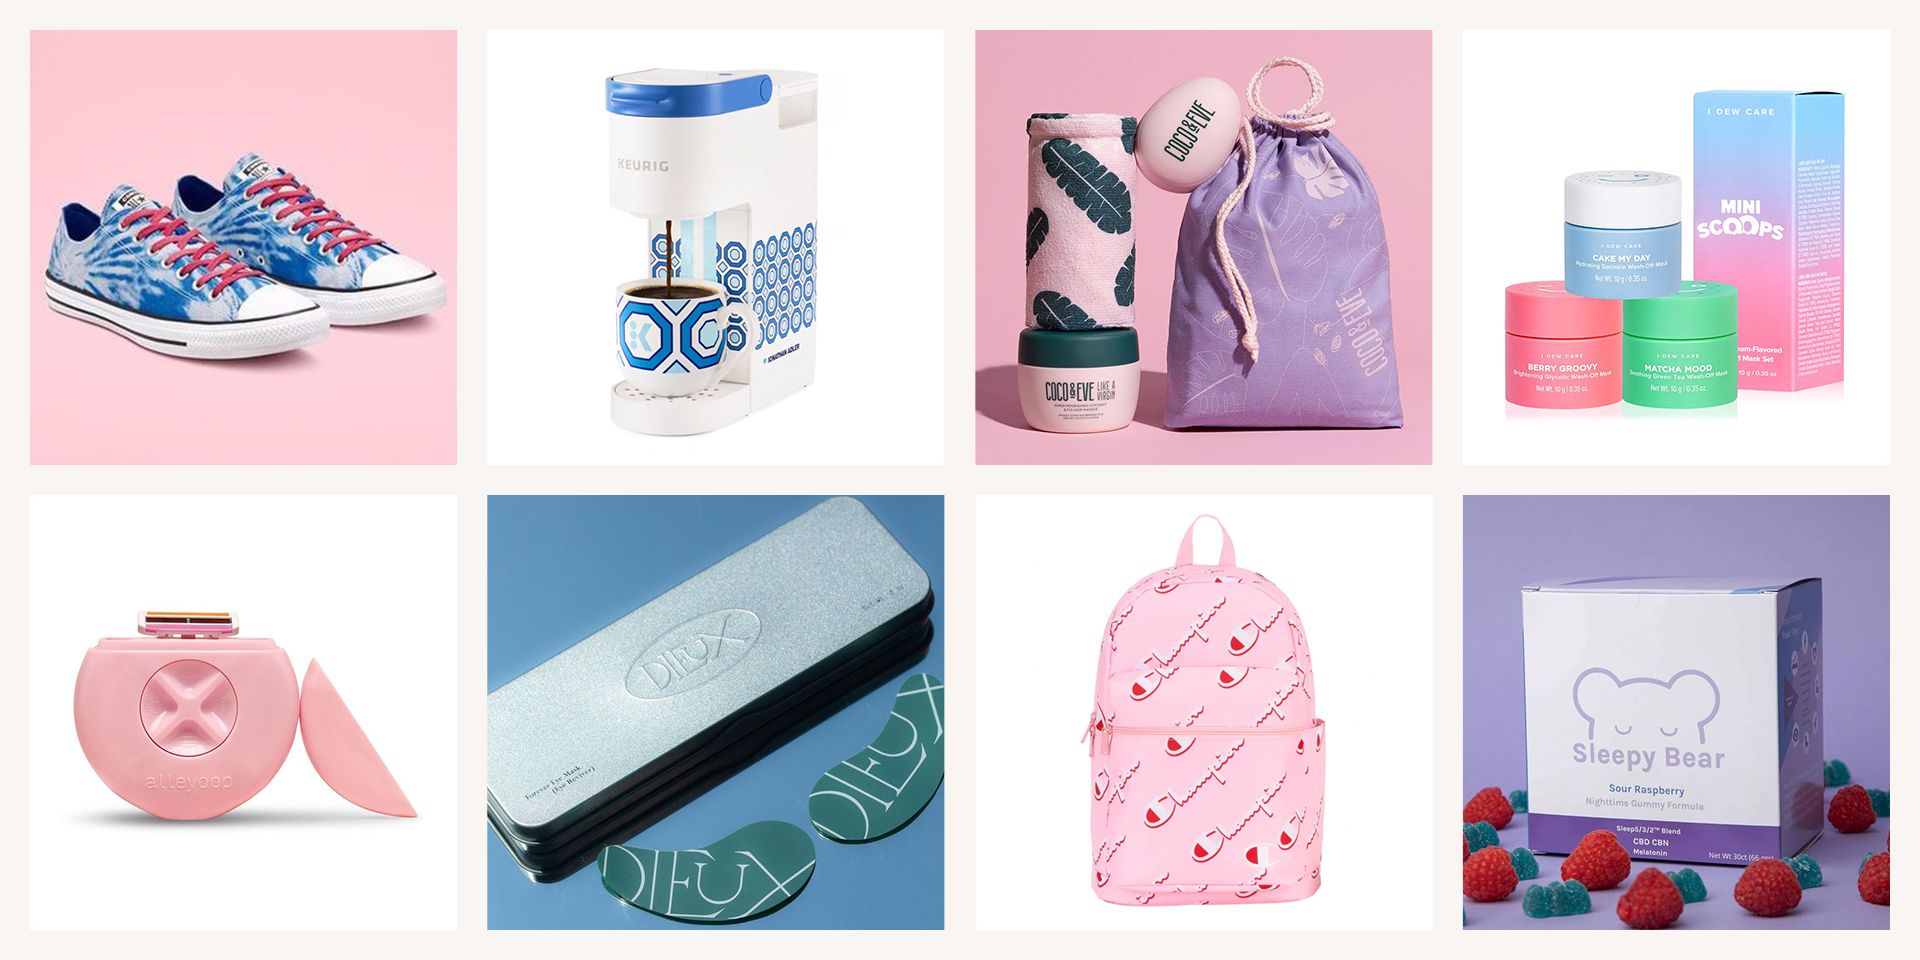 gifts for college girls